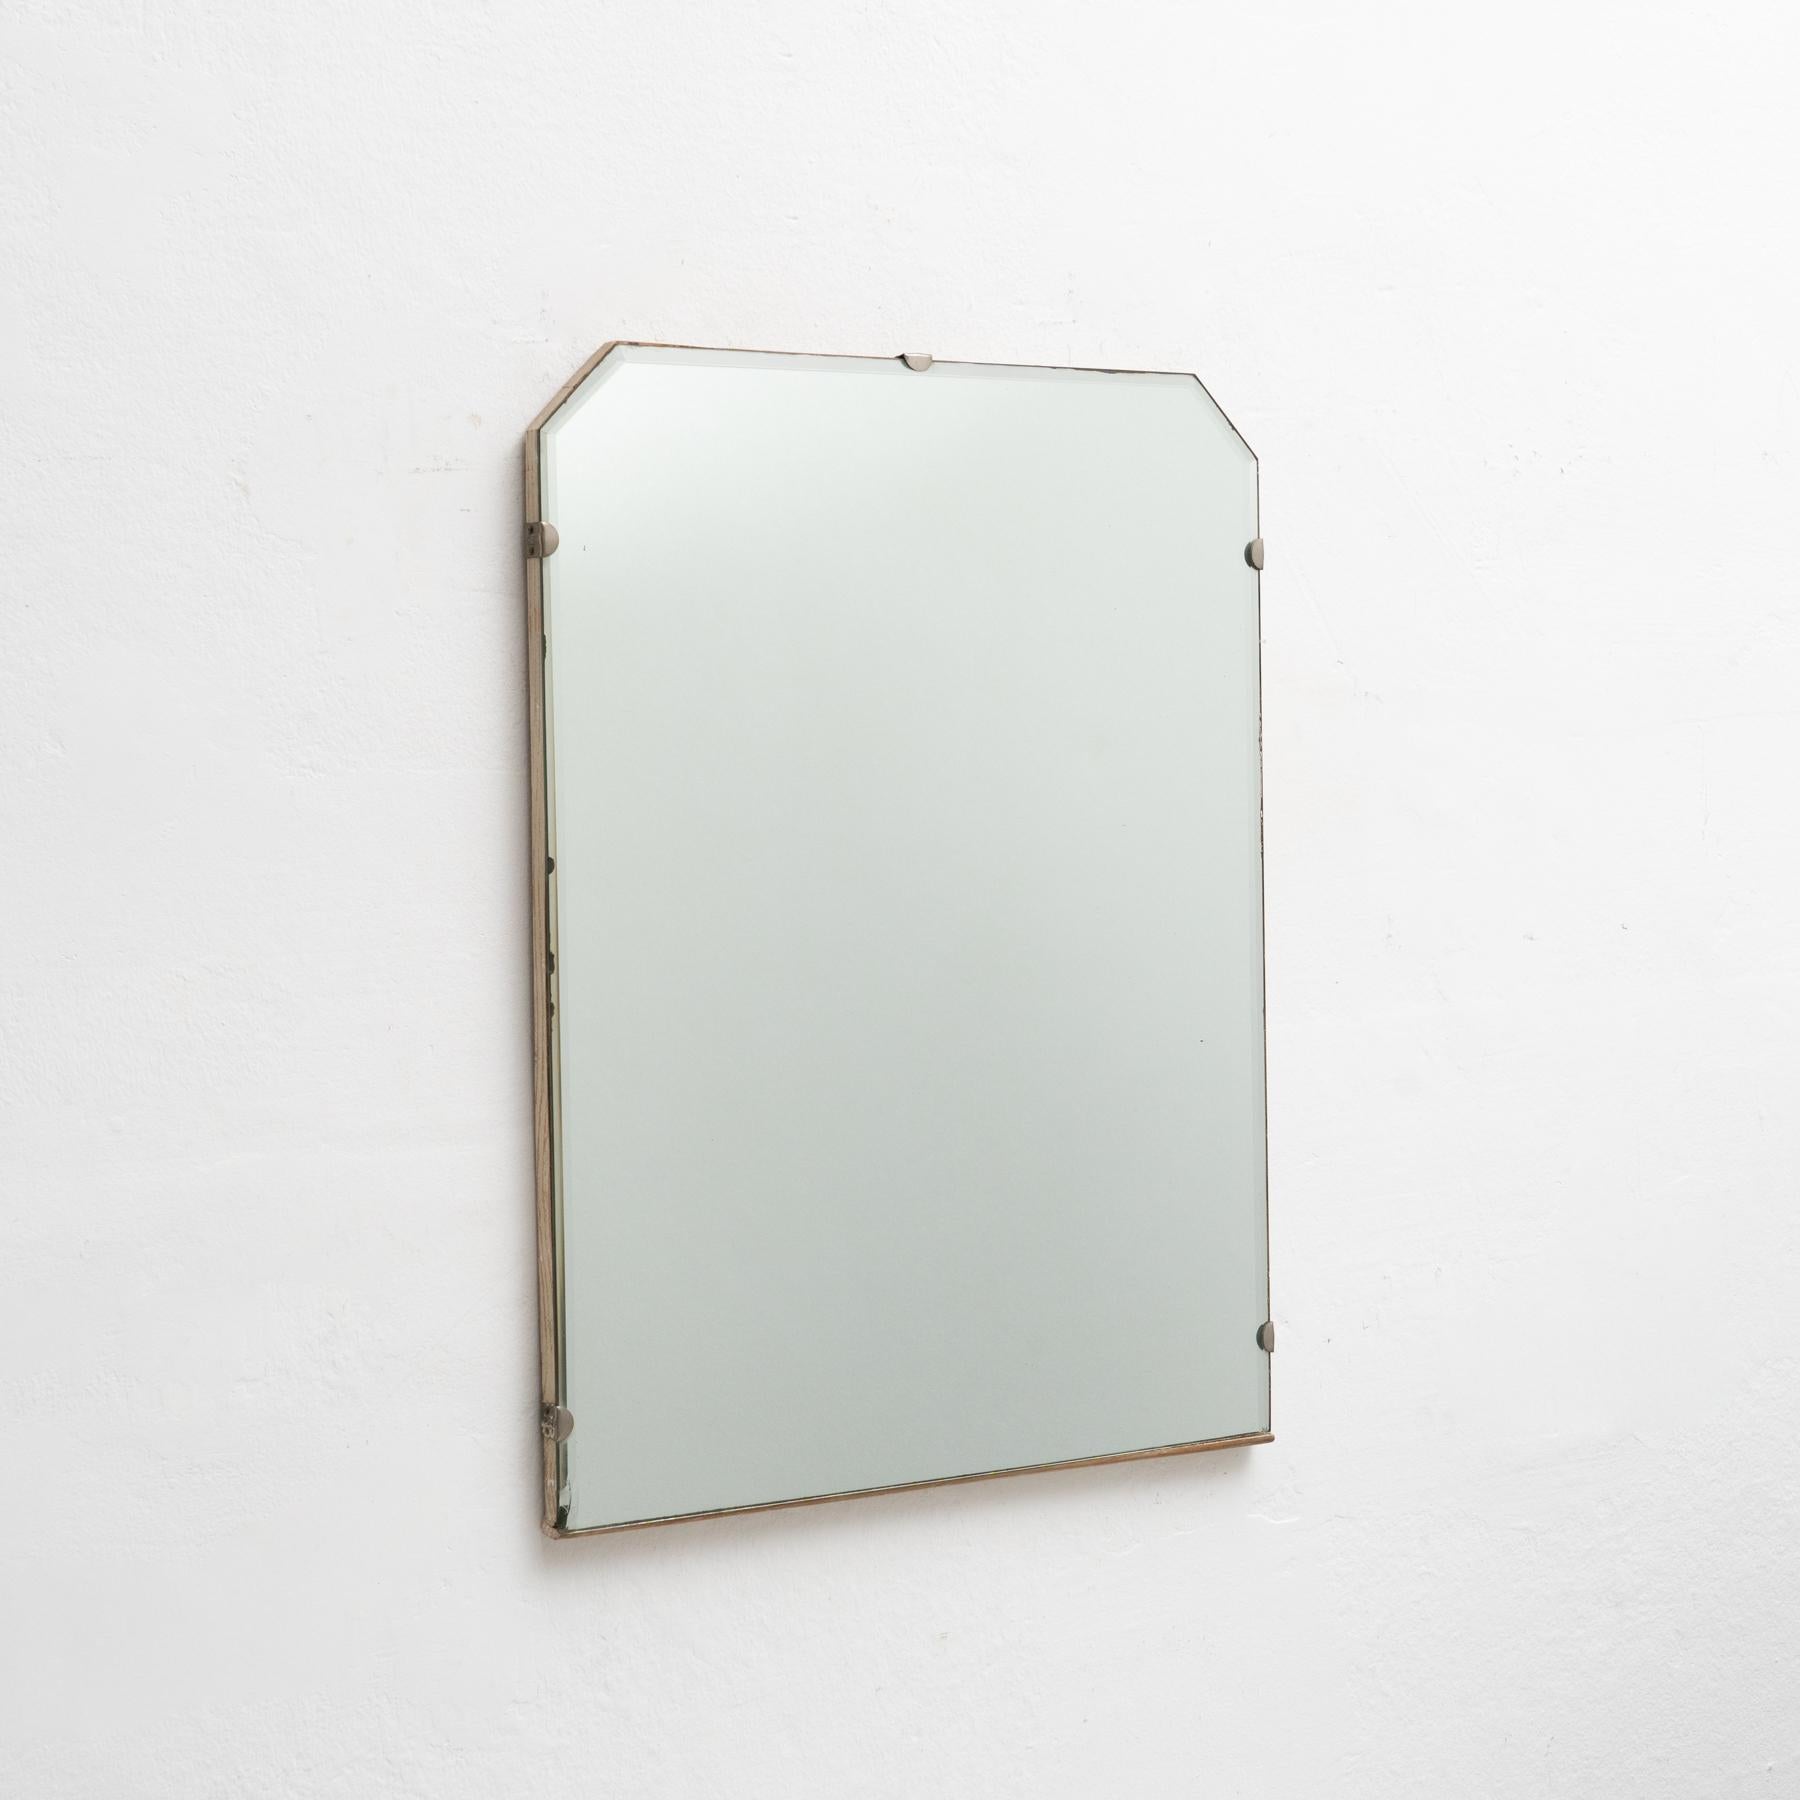 Antique Spanish metal mirror.

Manufactured by unknown designer in Spain, circa 1900

In original condition, with minor wear consistent of age and use, preserving a beautiful patina.

Materials:
Mirror.
Metal.